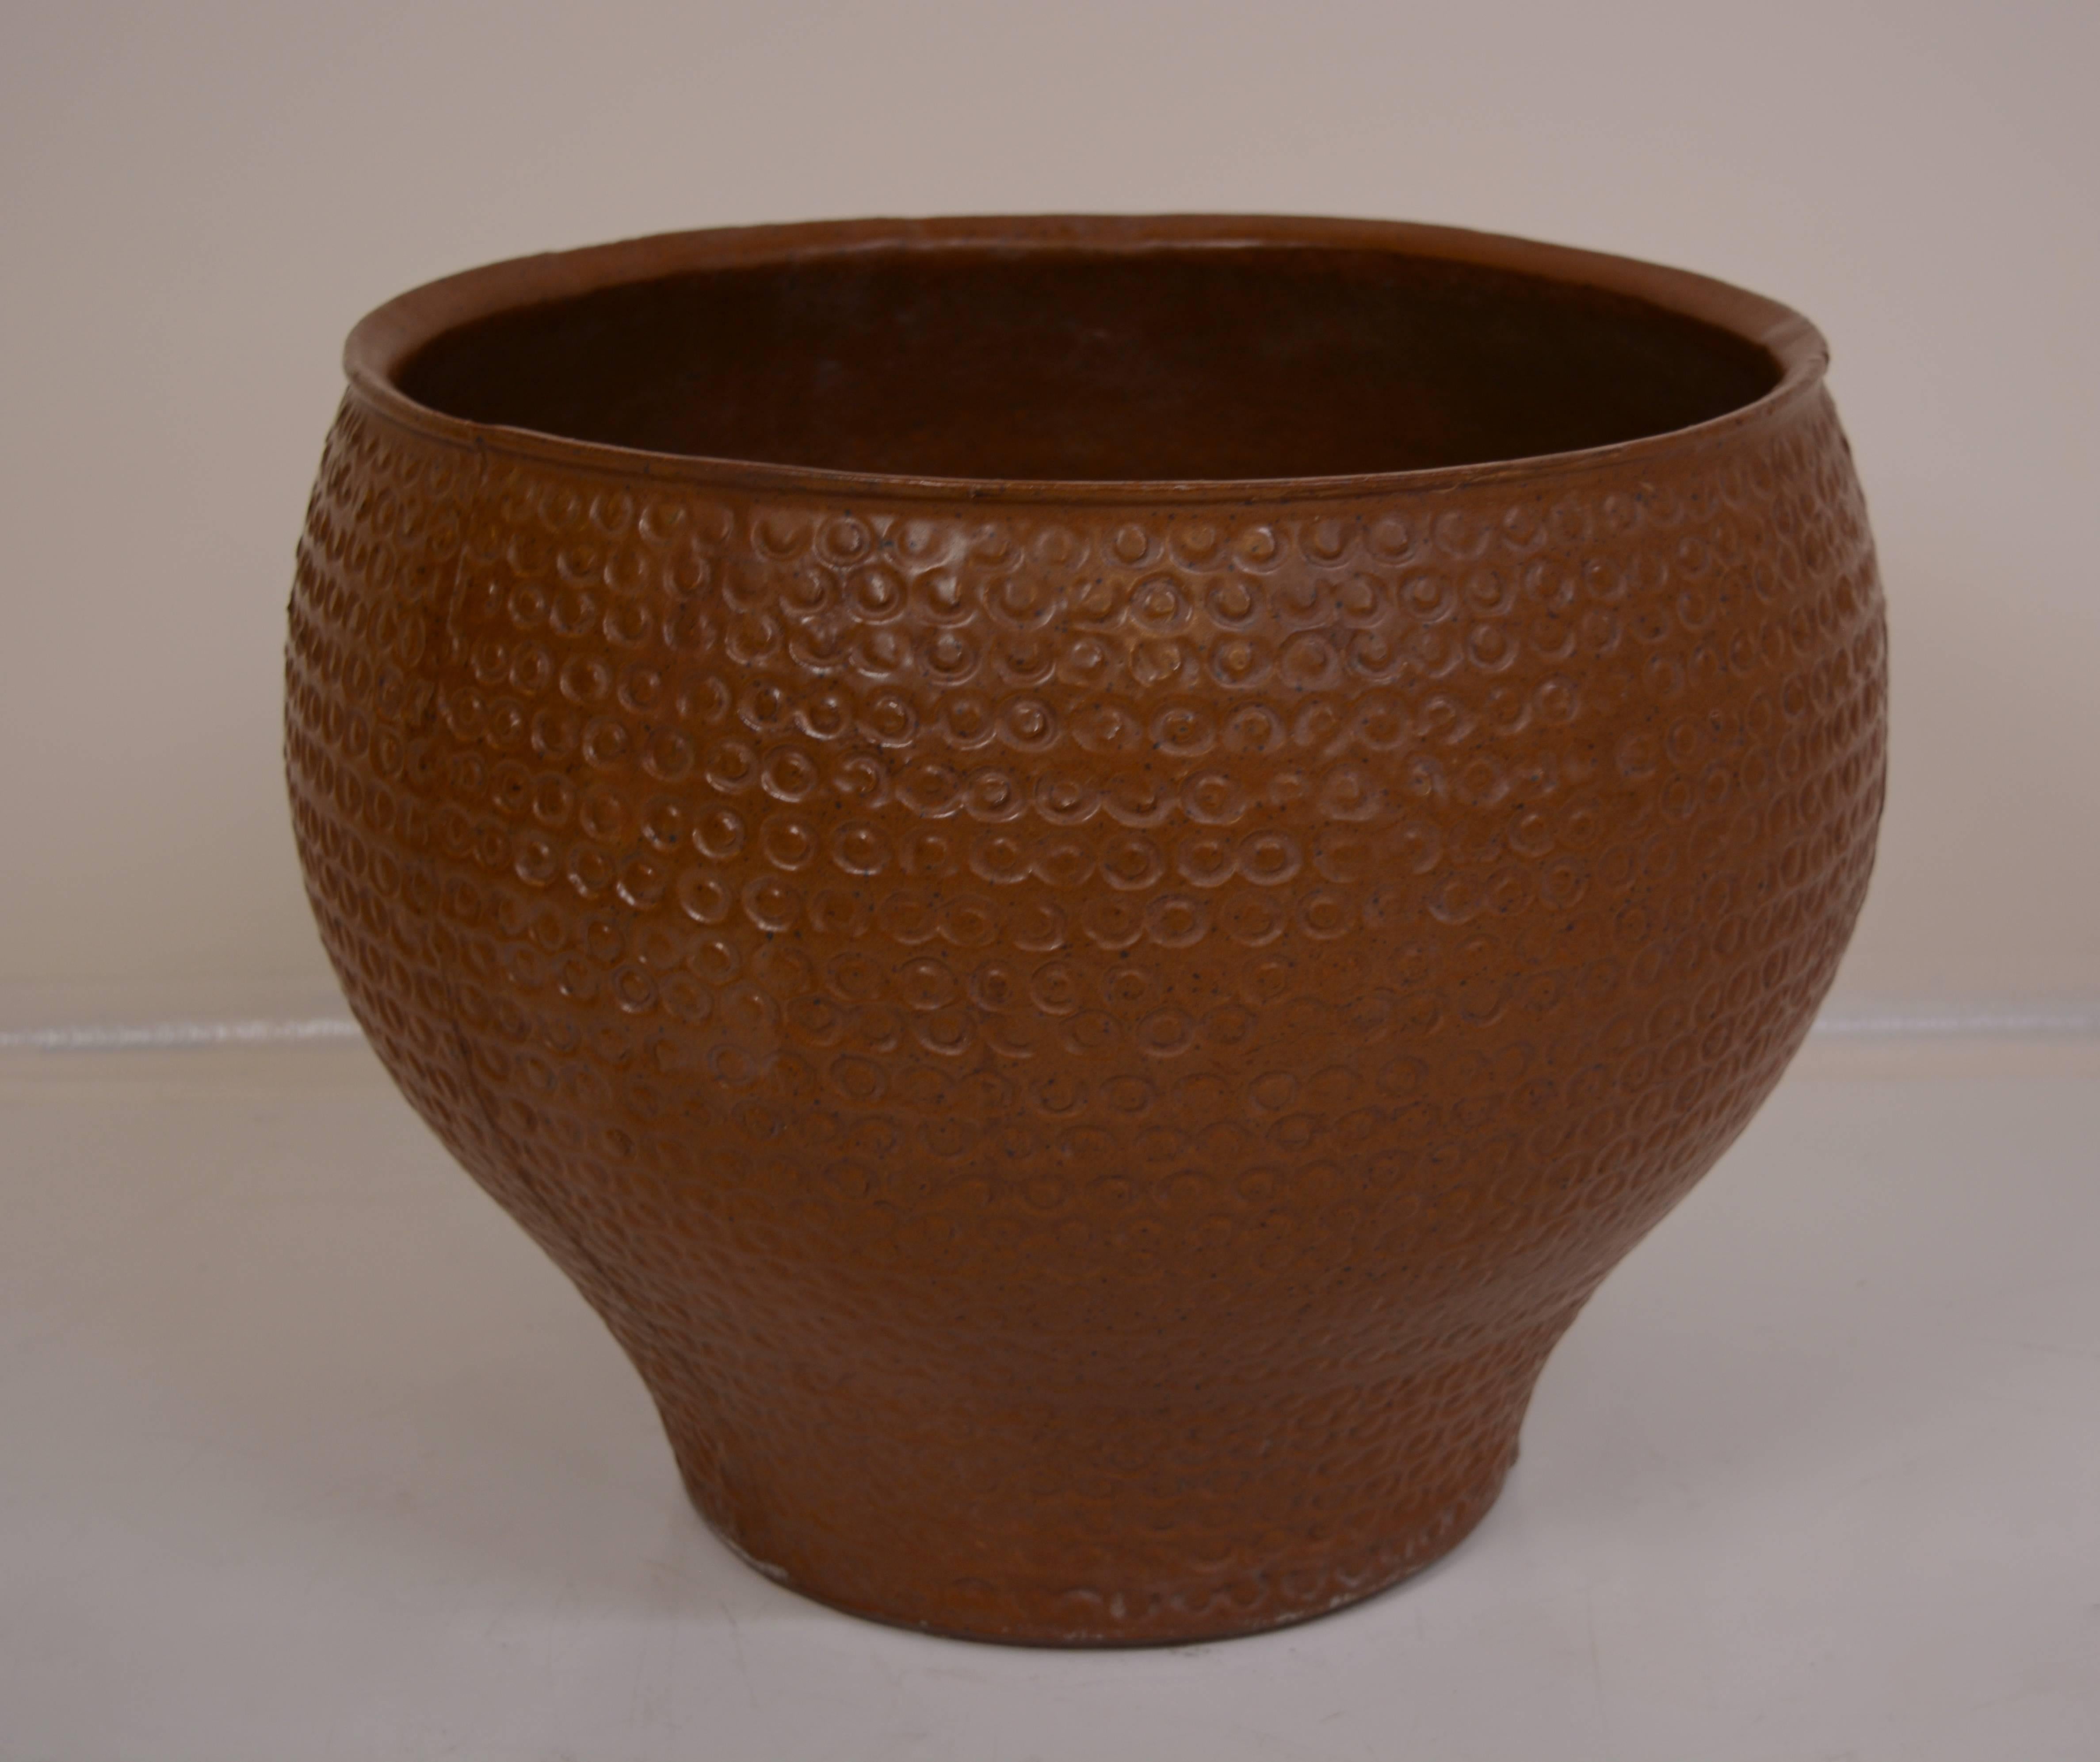 Large cheerio planter by David Cressey for Architectural Pottery. Made in Los Angeles, Ca. circa 1960s.